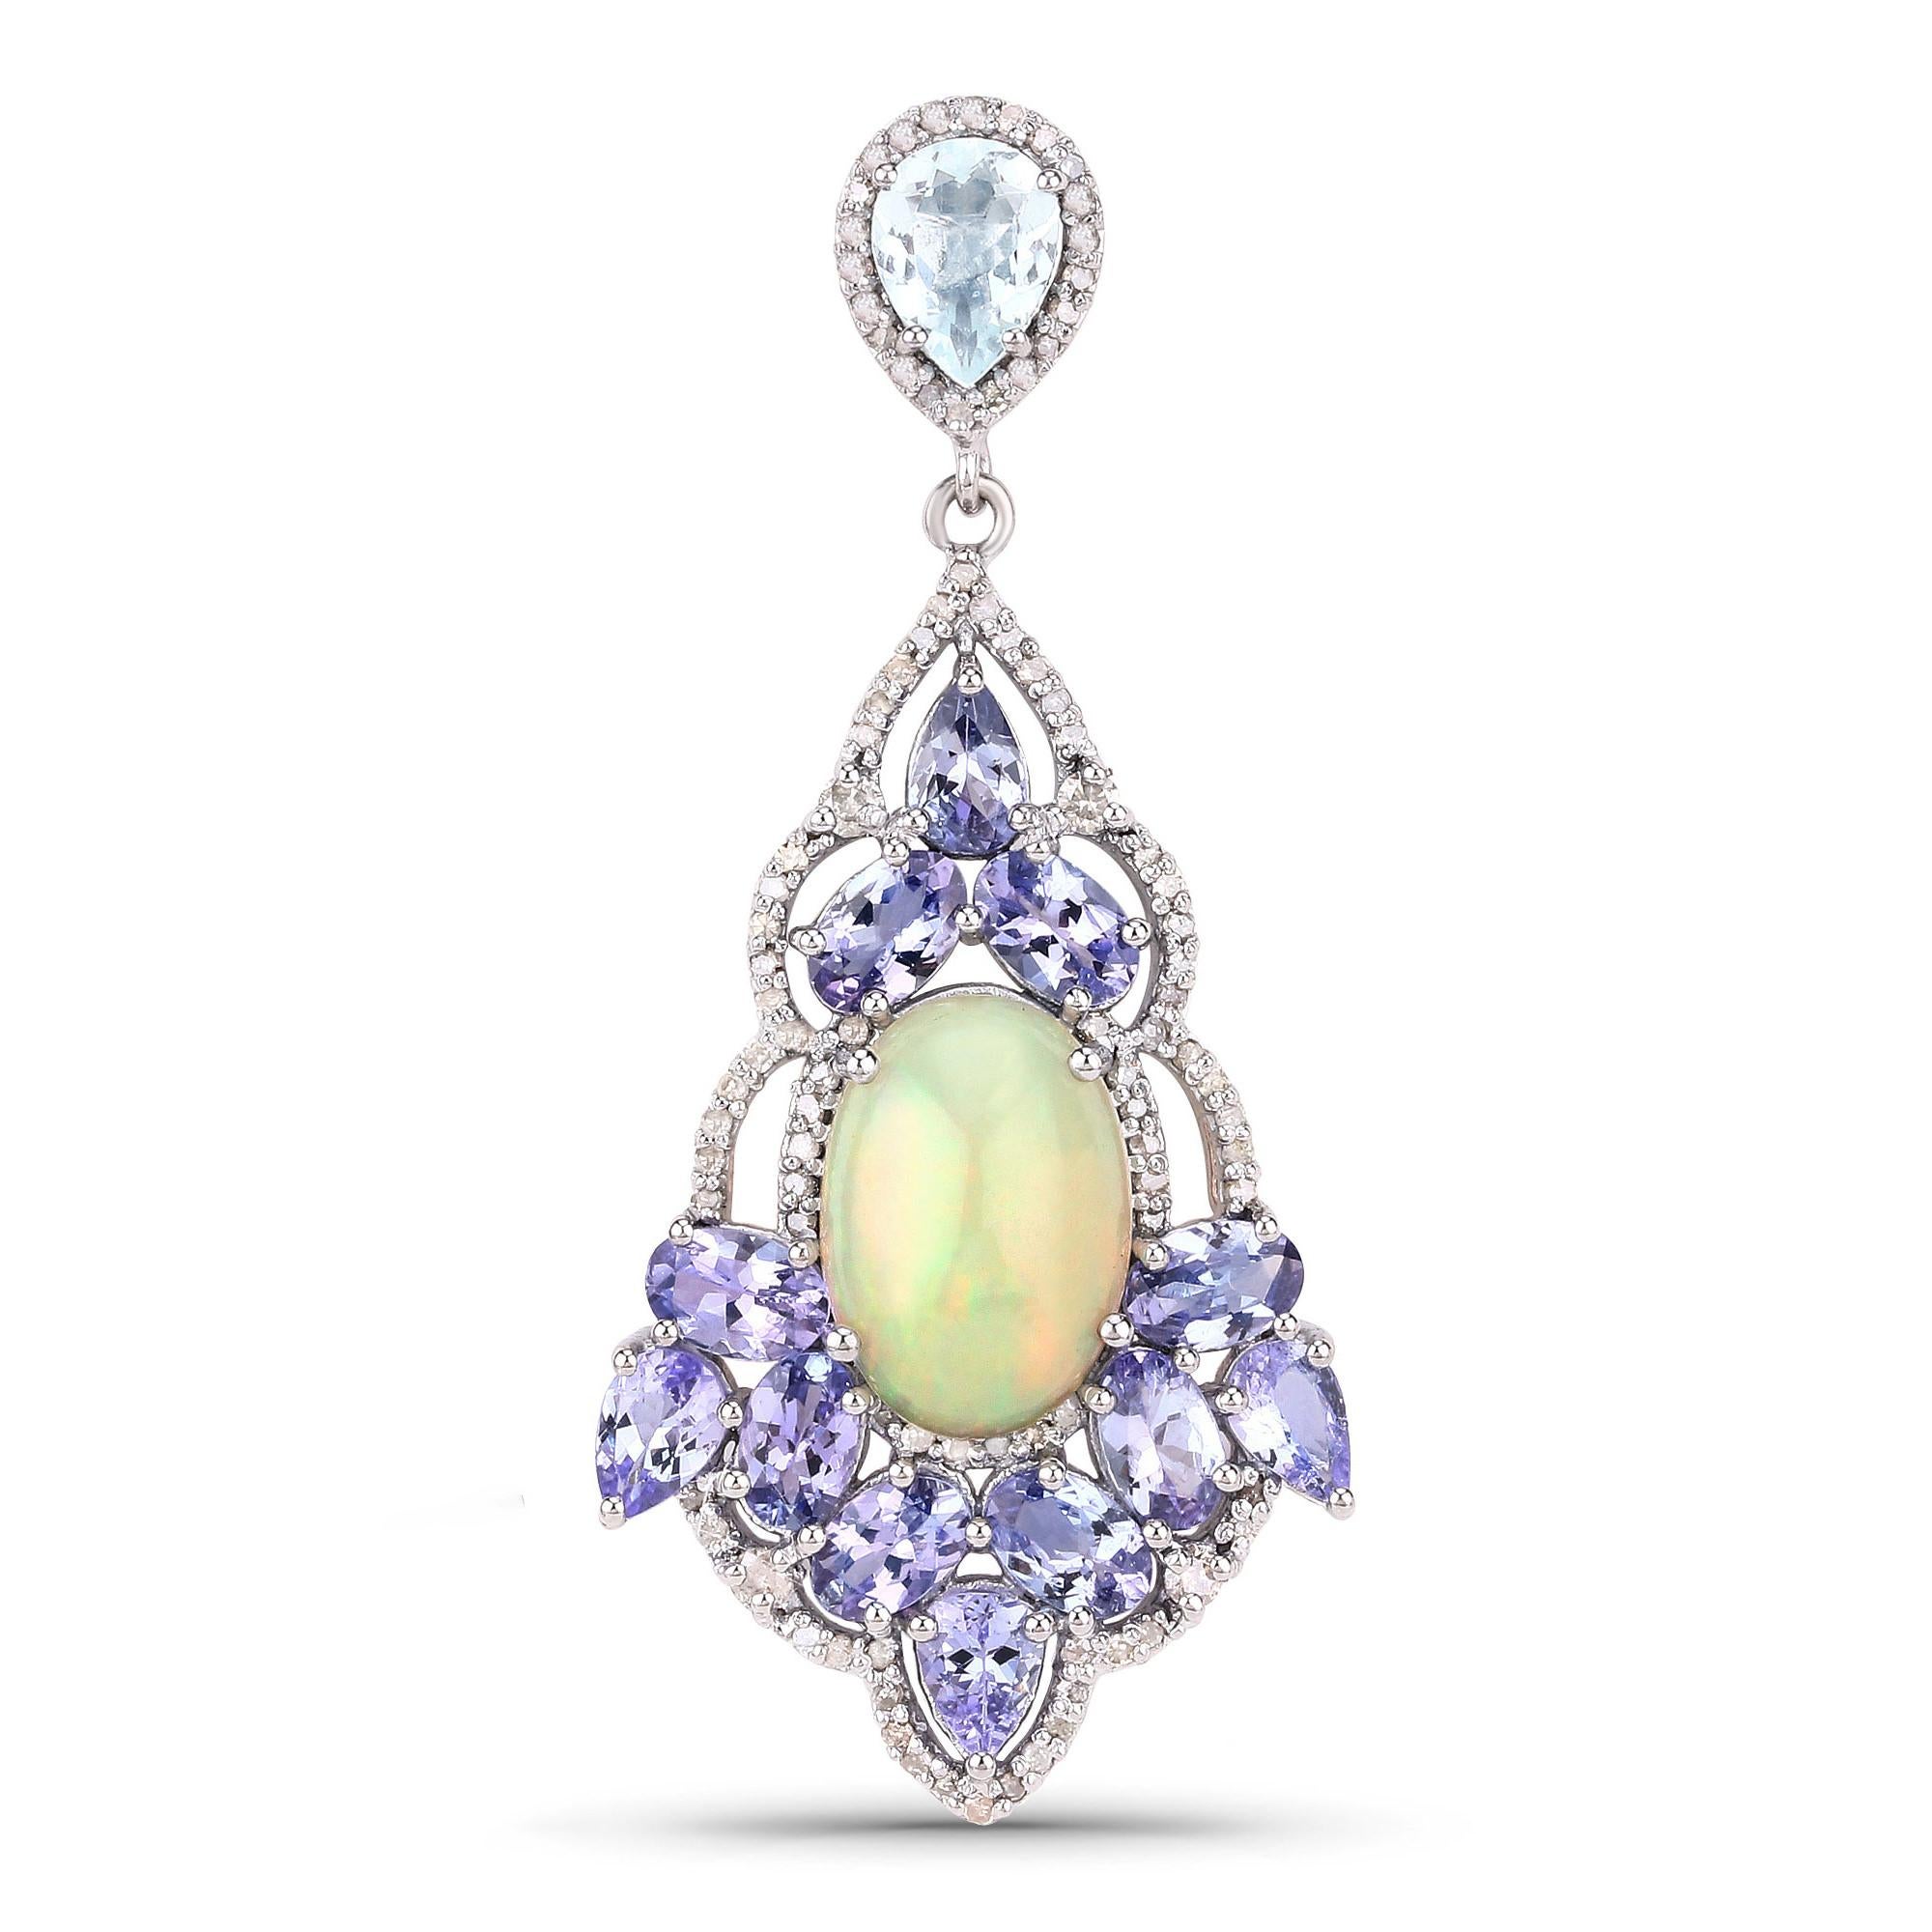 Mixed Cut Natural Tanzanite Aquamarine Opal and Diamond Statement Earrings 17.7 Carats For Sale